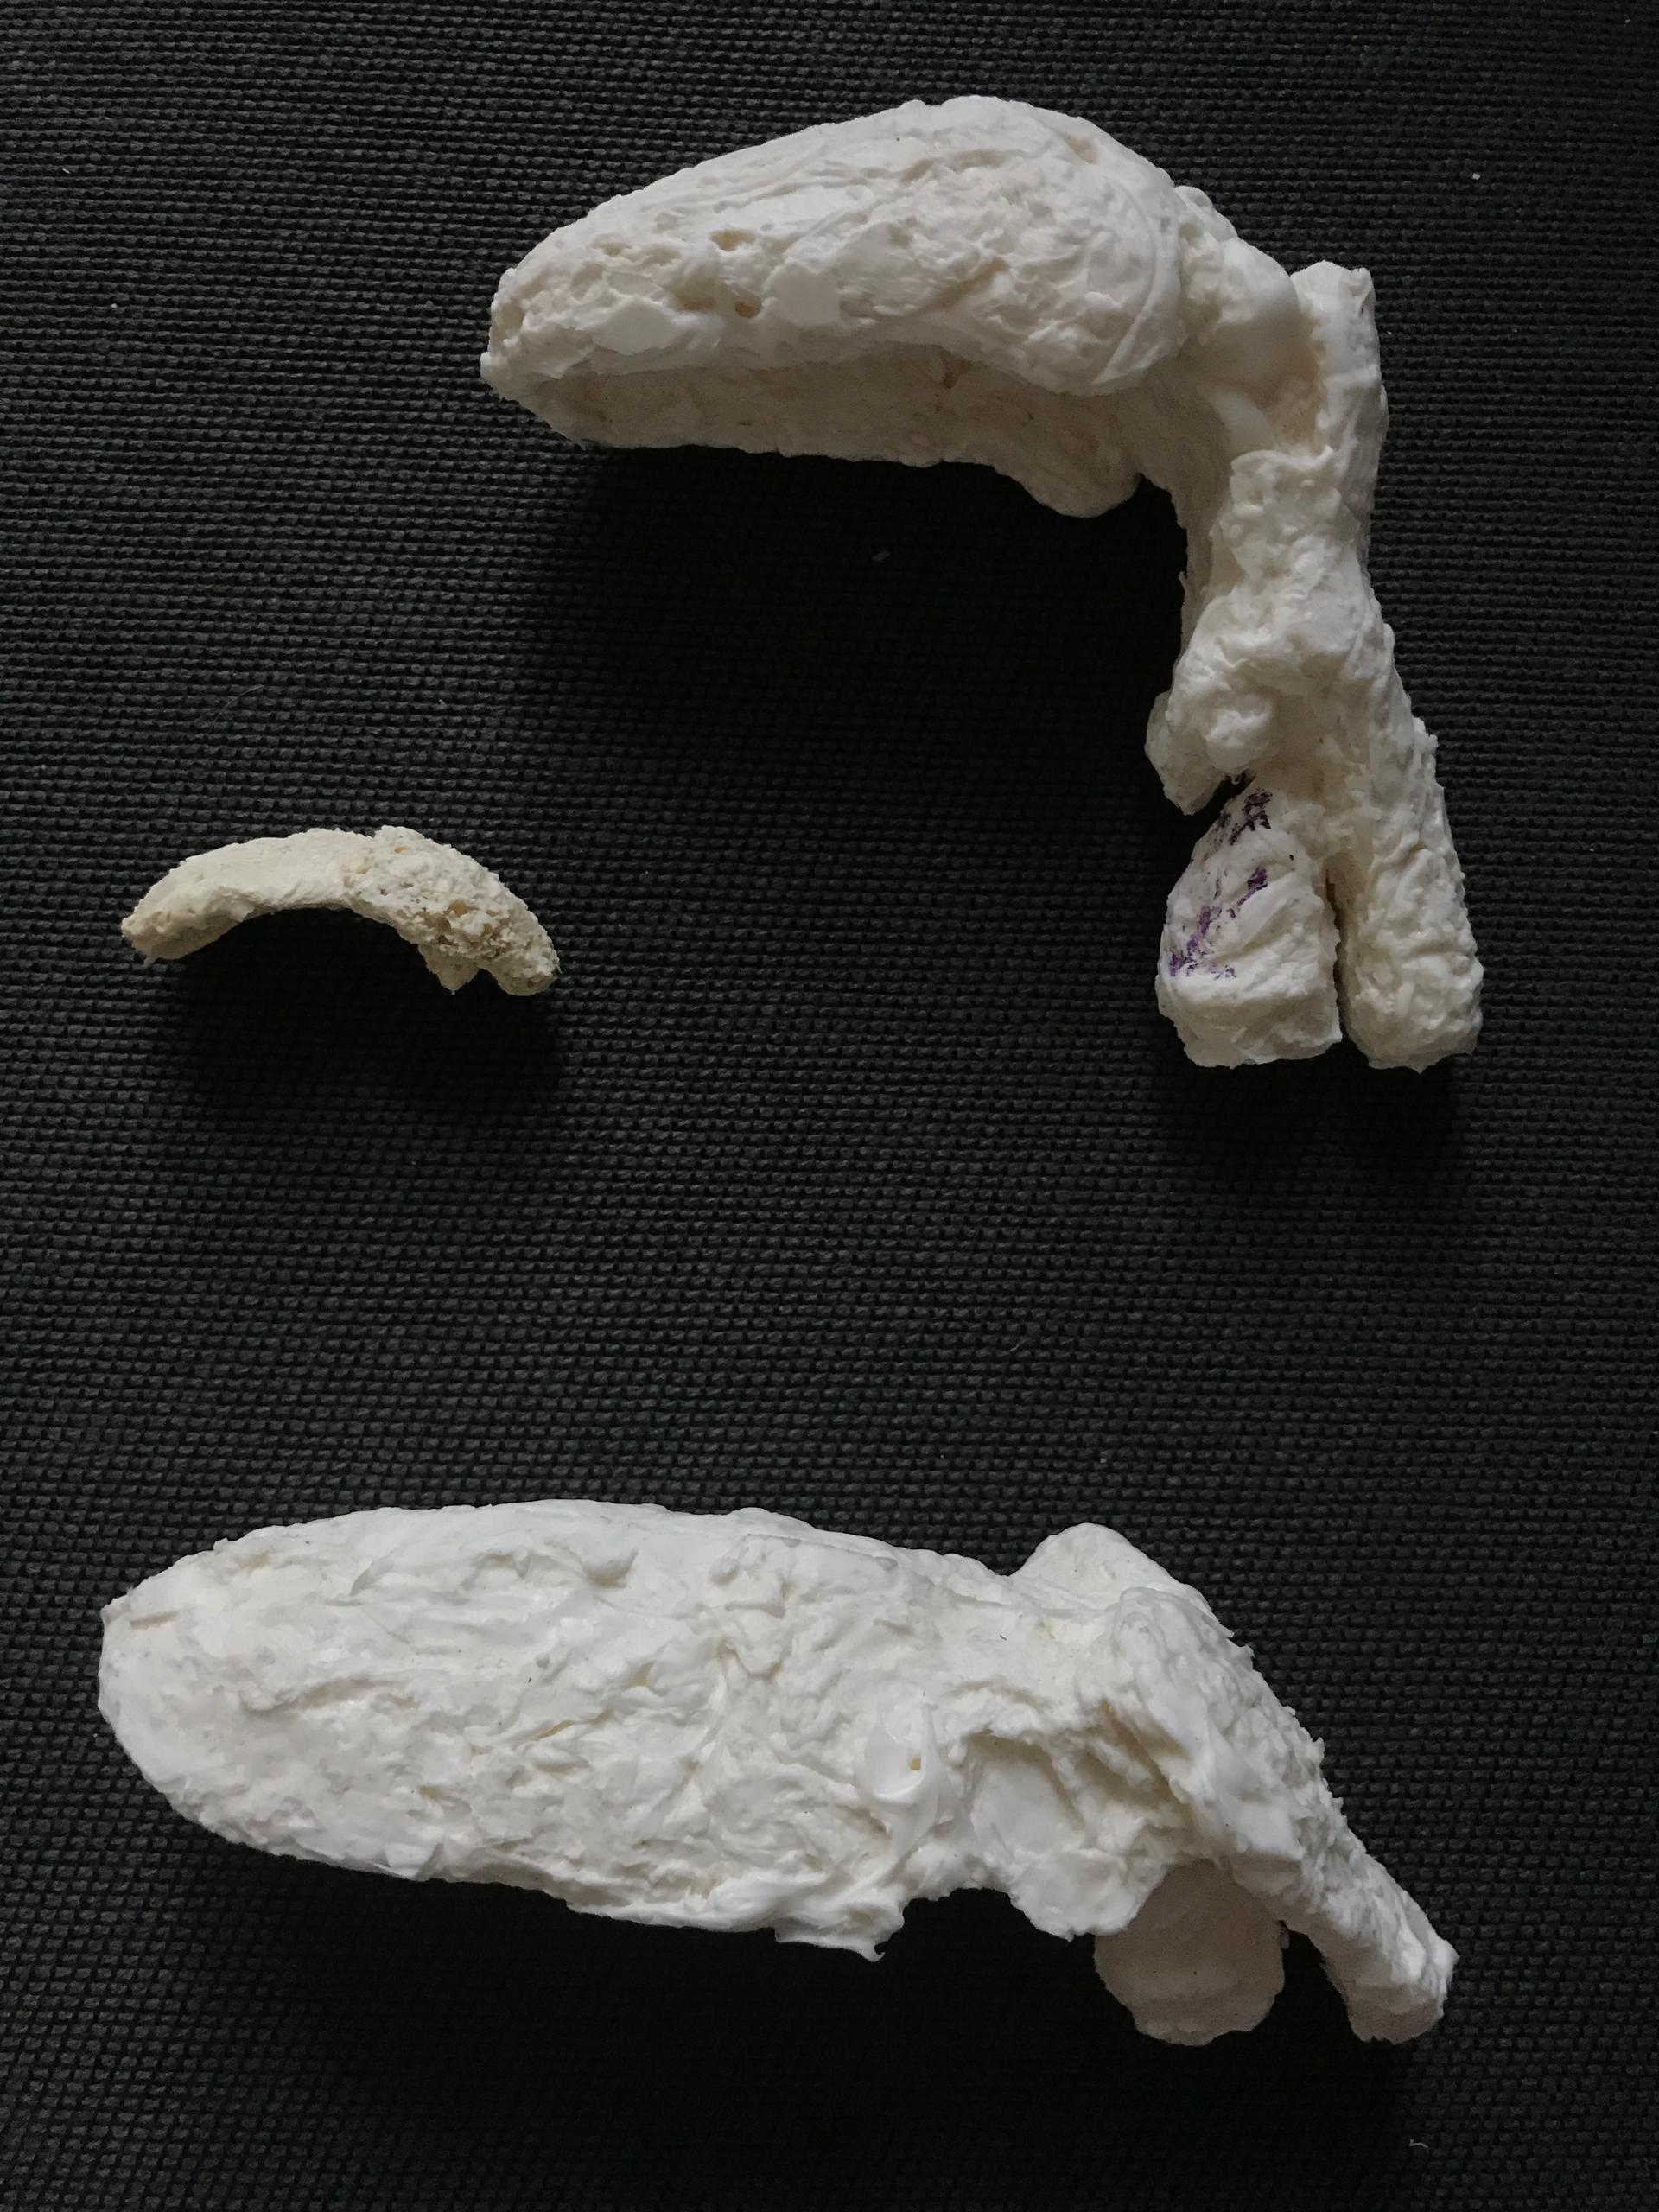 Silicon casts of vocal tracts — the airways and cavities filling the mouth and nose.